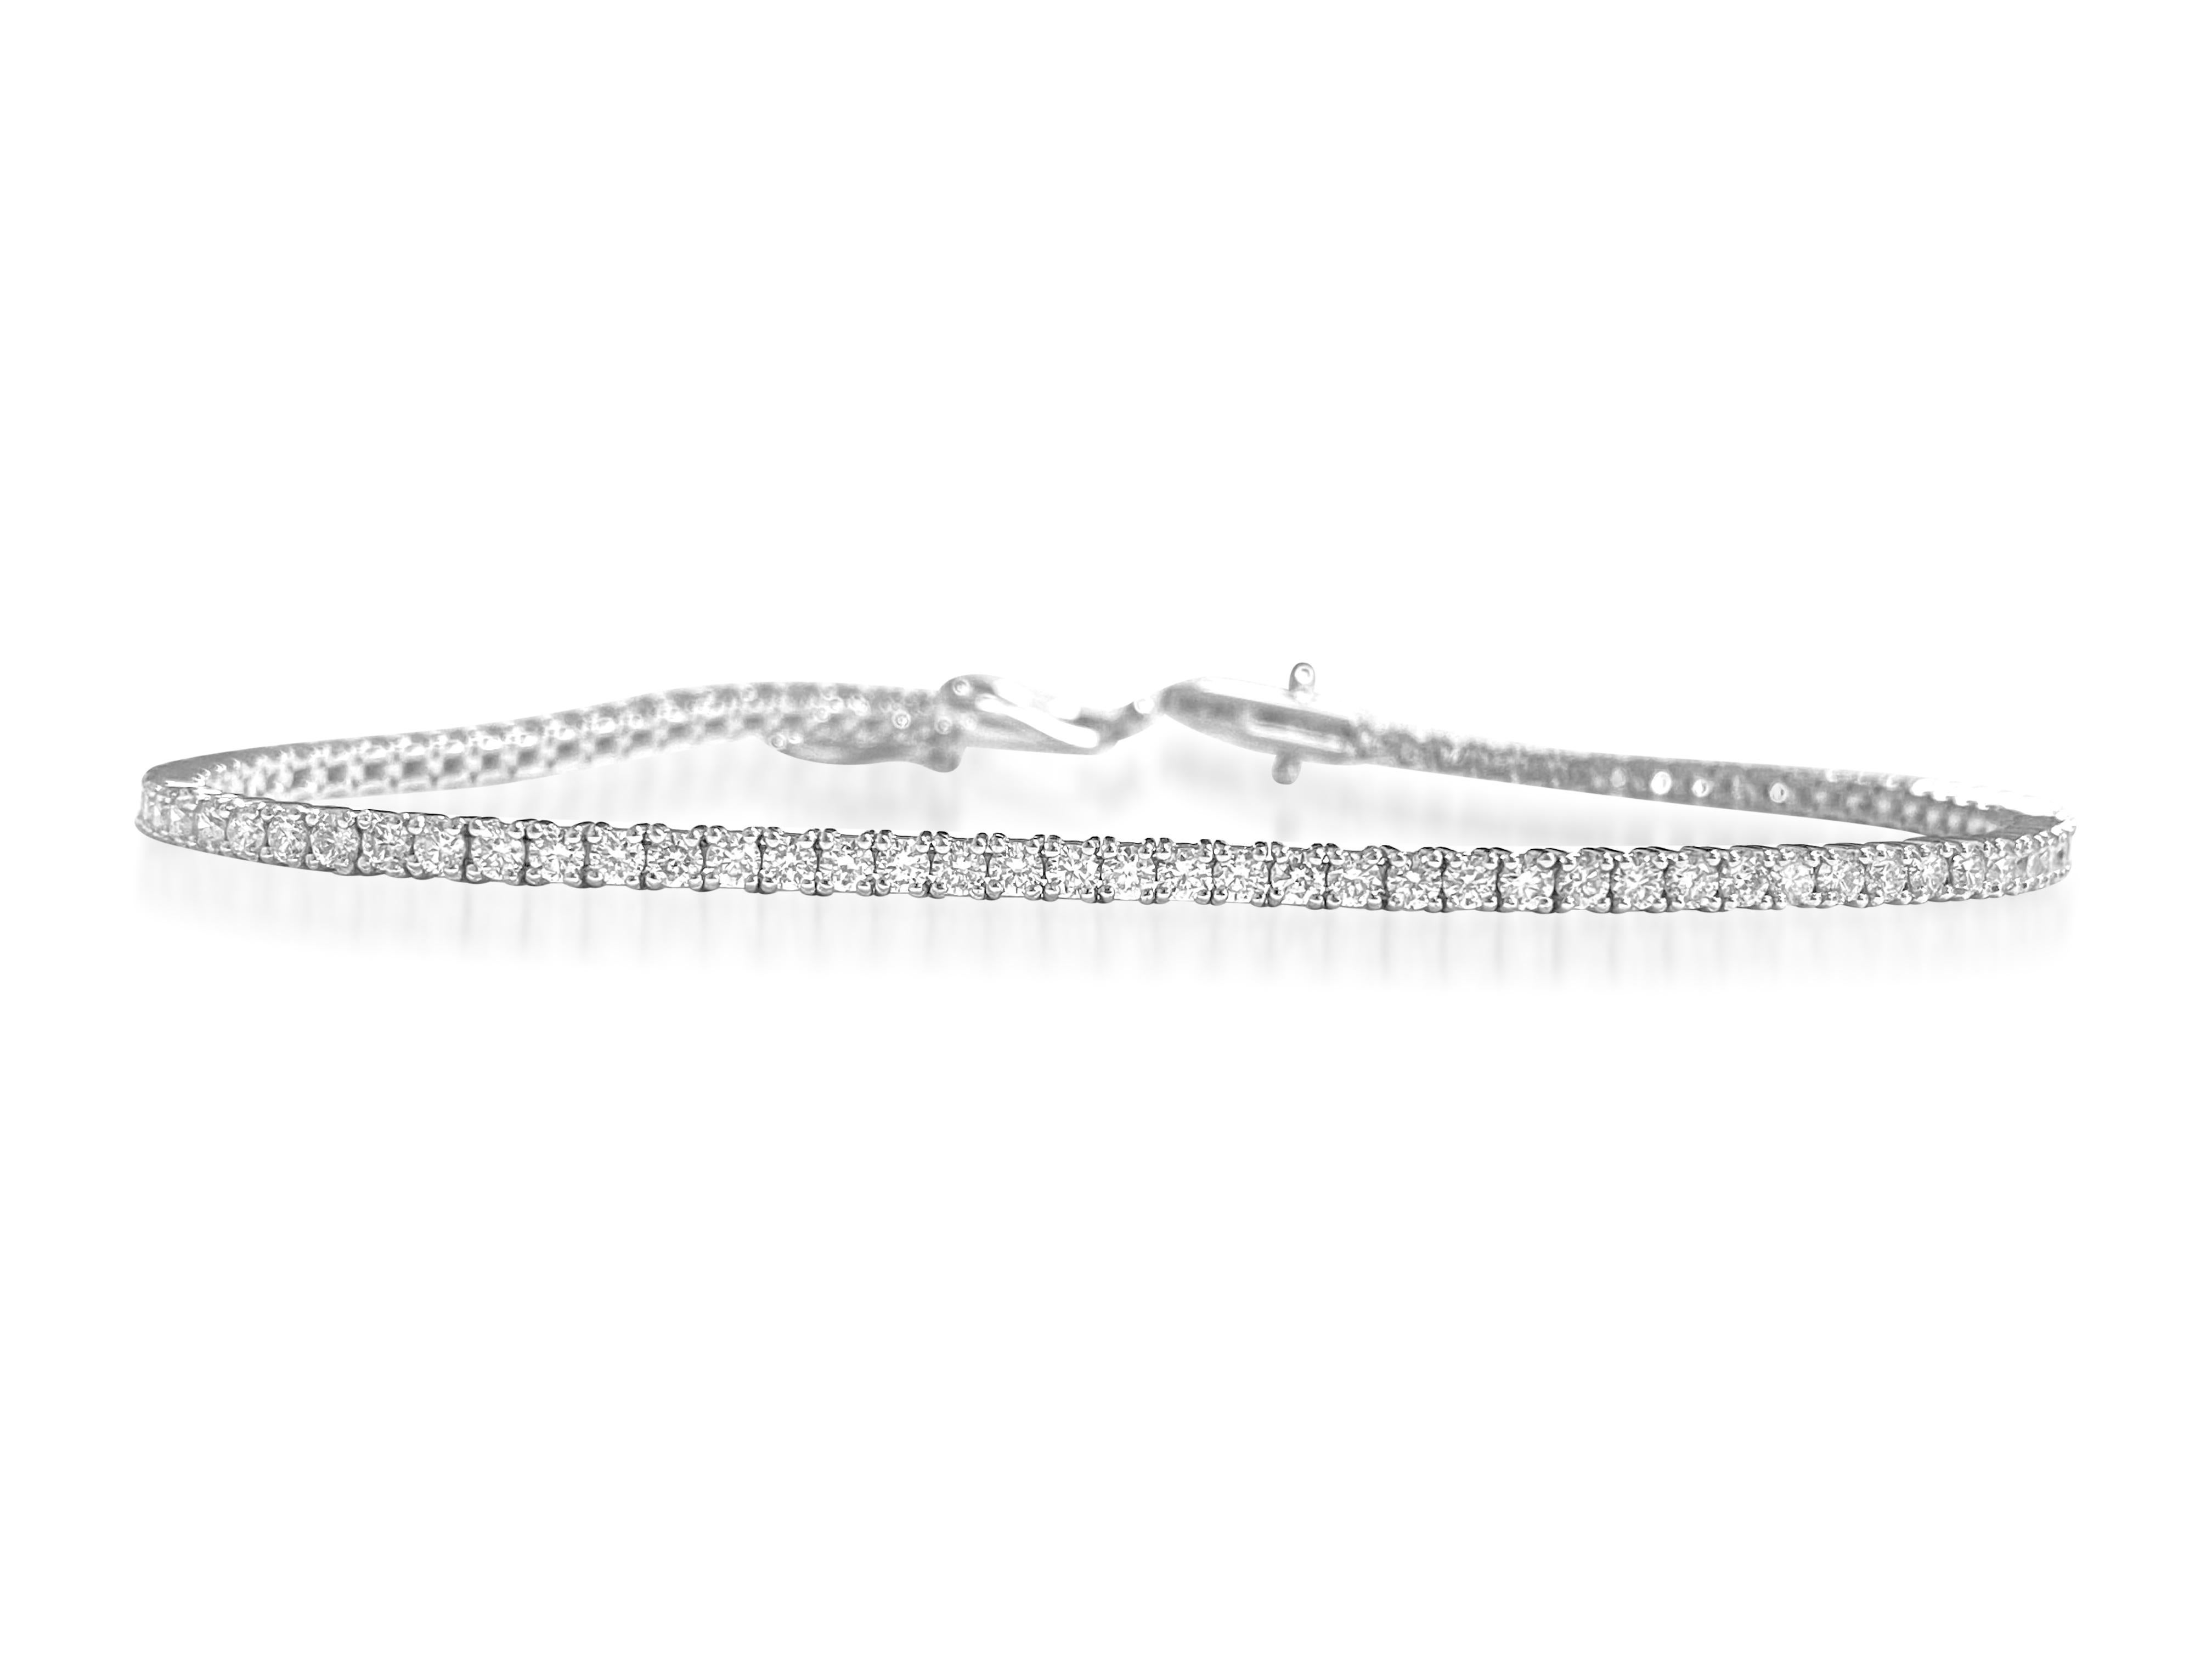 Fashioned from stunning 14k white gold, this elegant diamond tennis bracelet boasts a total weight of 2.50 carats, adorned with sparkling VS clarity diamonds. Each diamond is meticulously set to perfection, showcasing their natural brilliance and